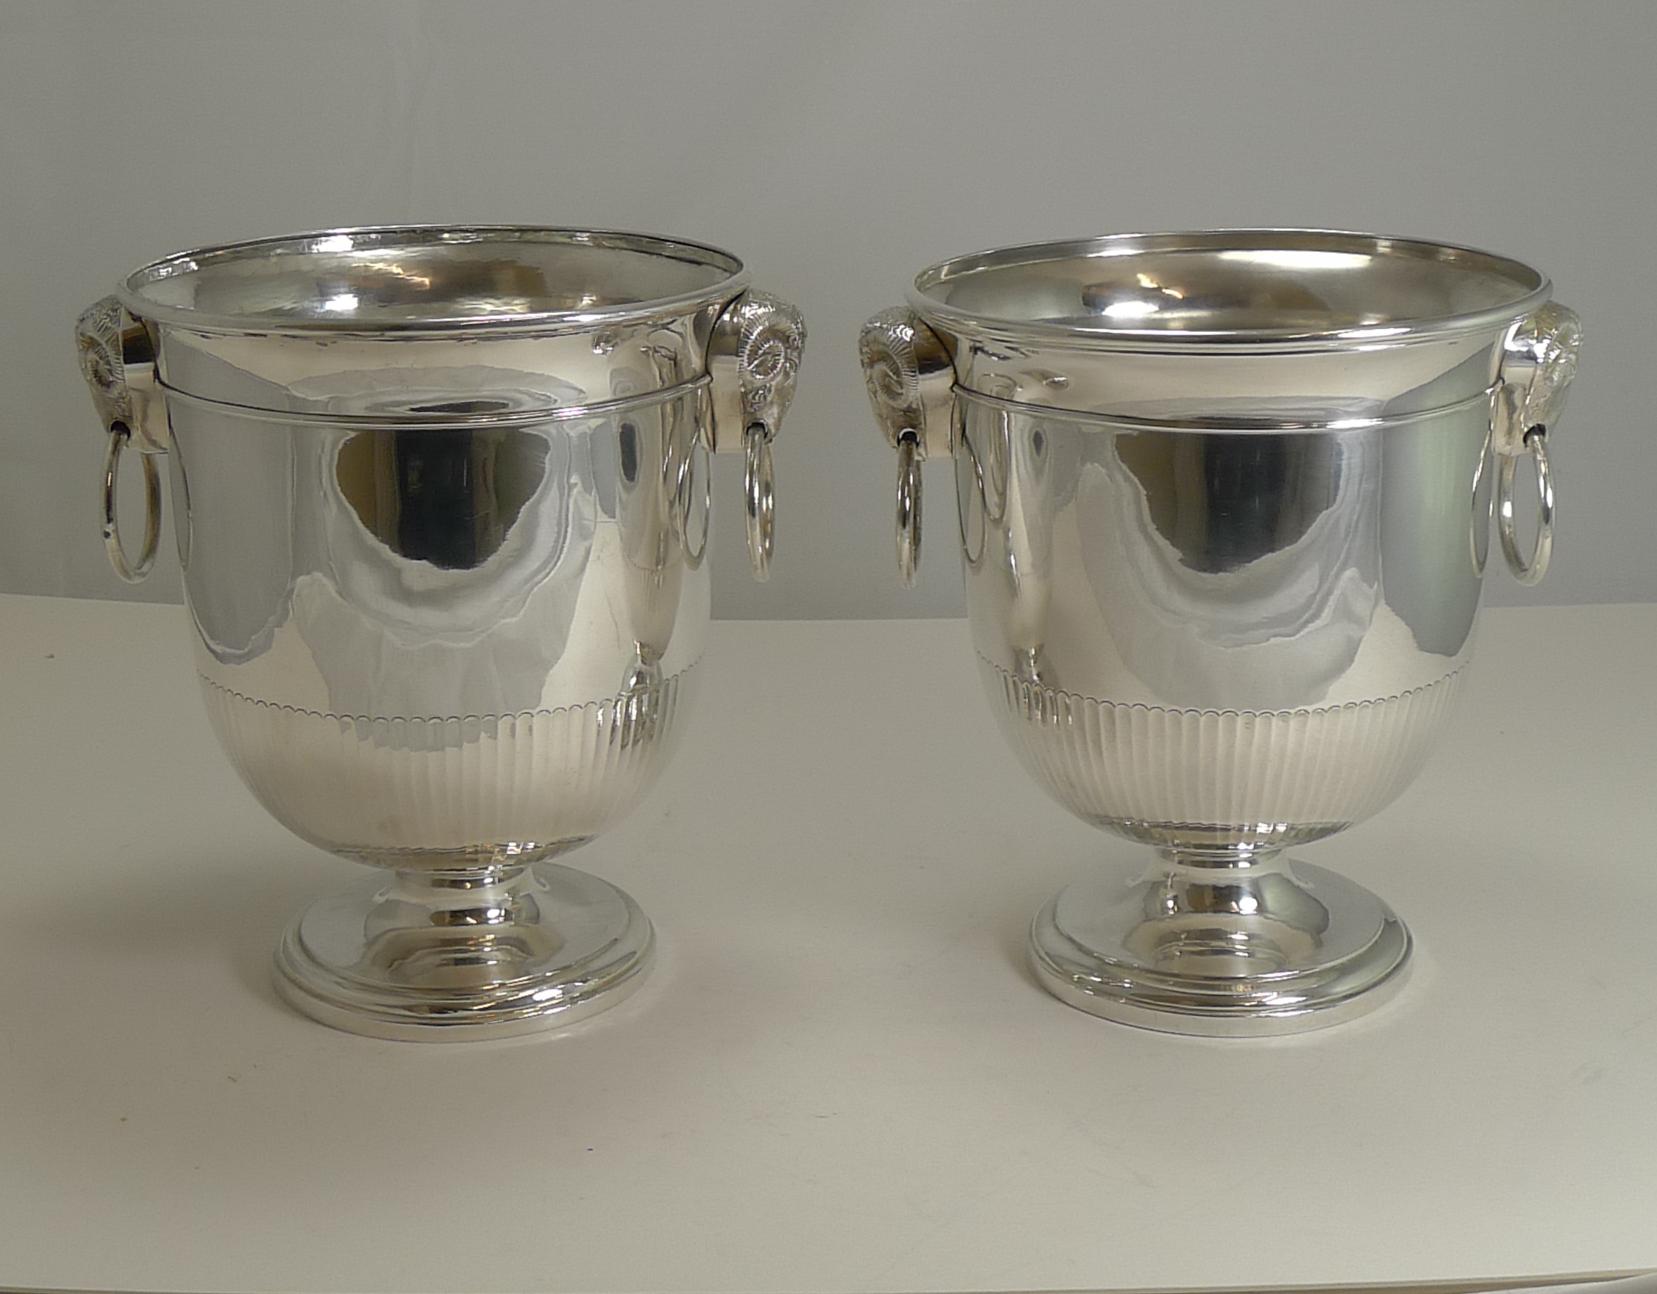 Mid-19th Century Fine Pair of English Sheffield Plate Wine / Champagne Coolers / Ice Buckets